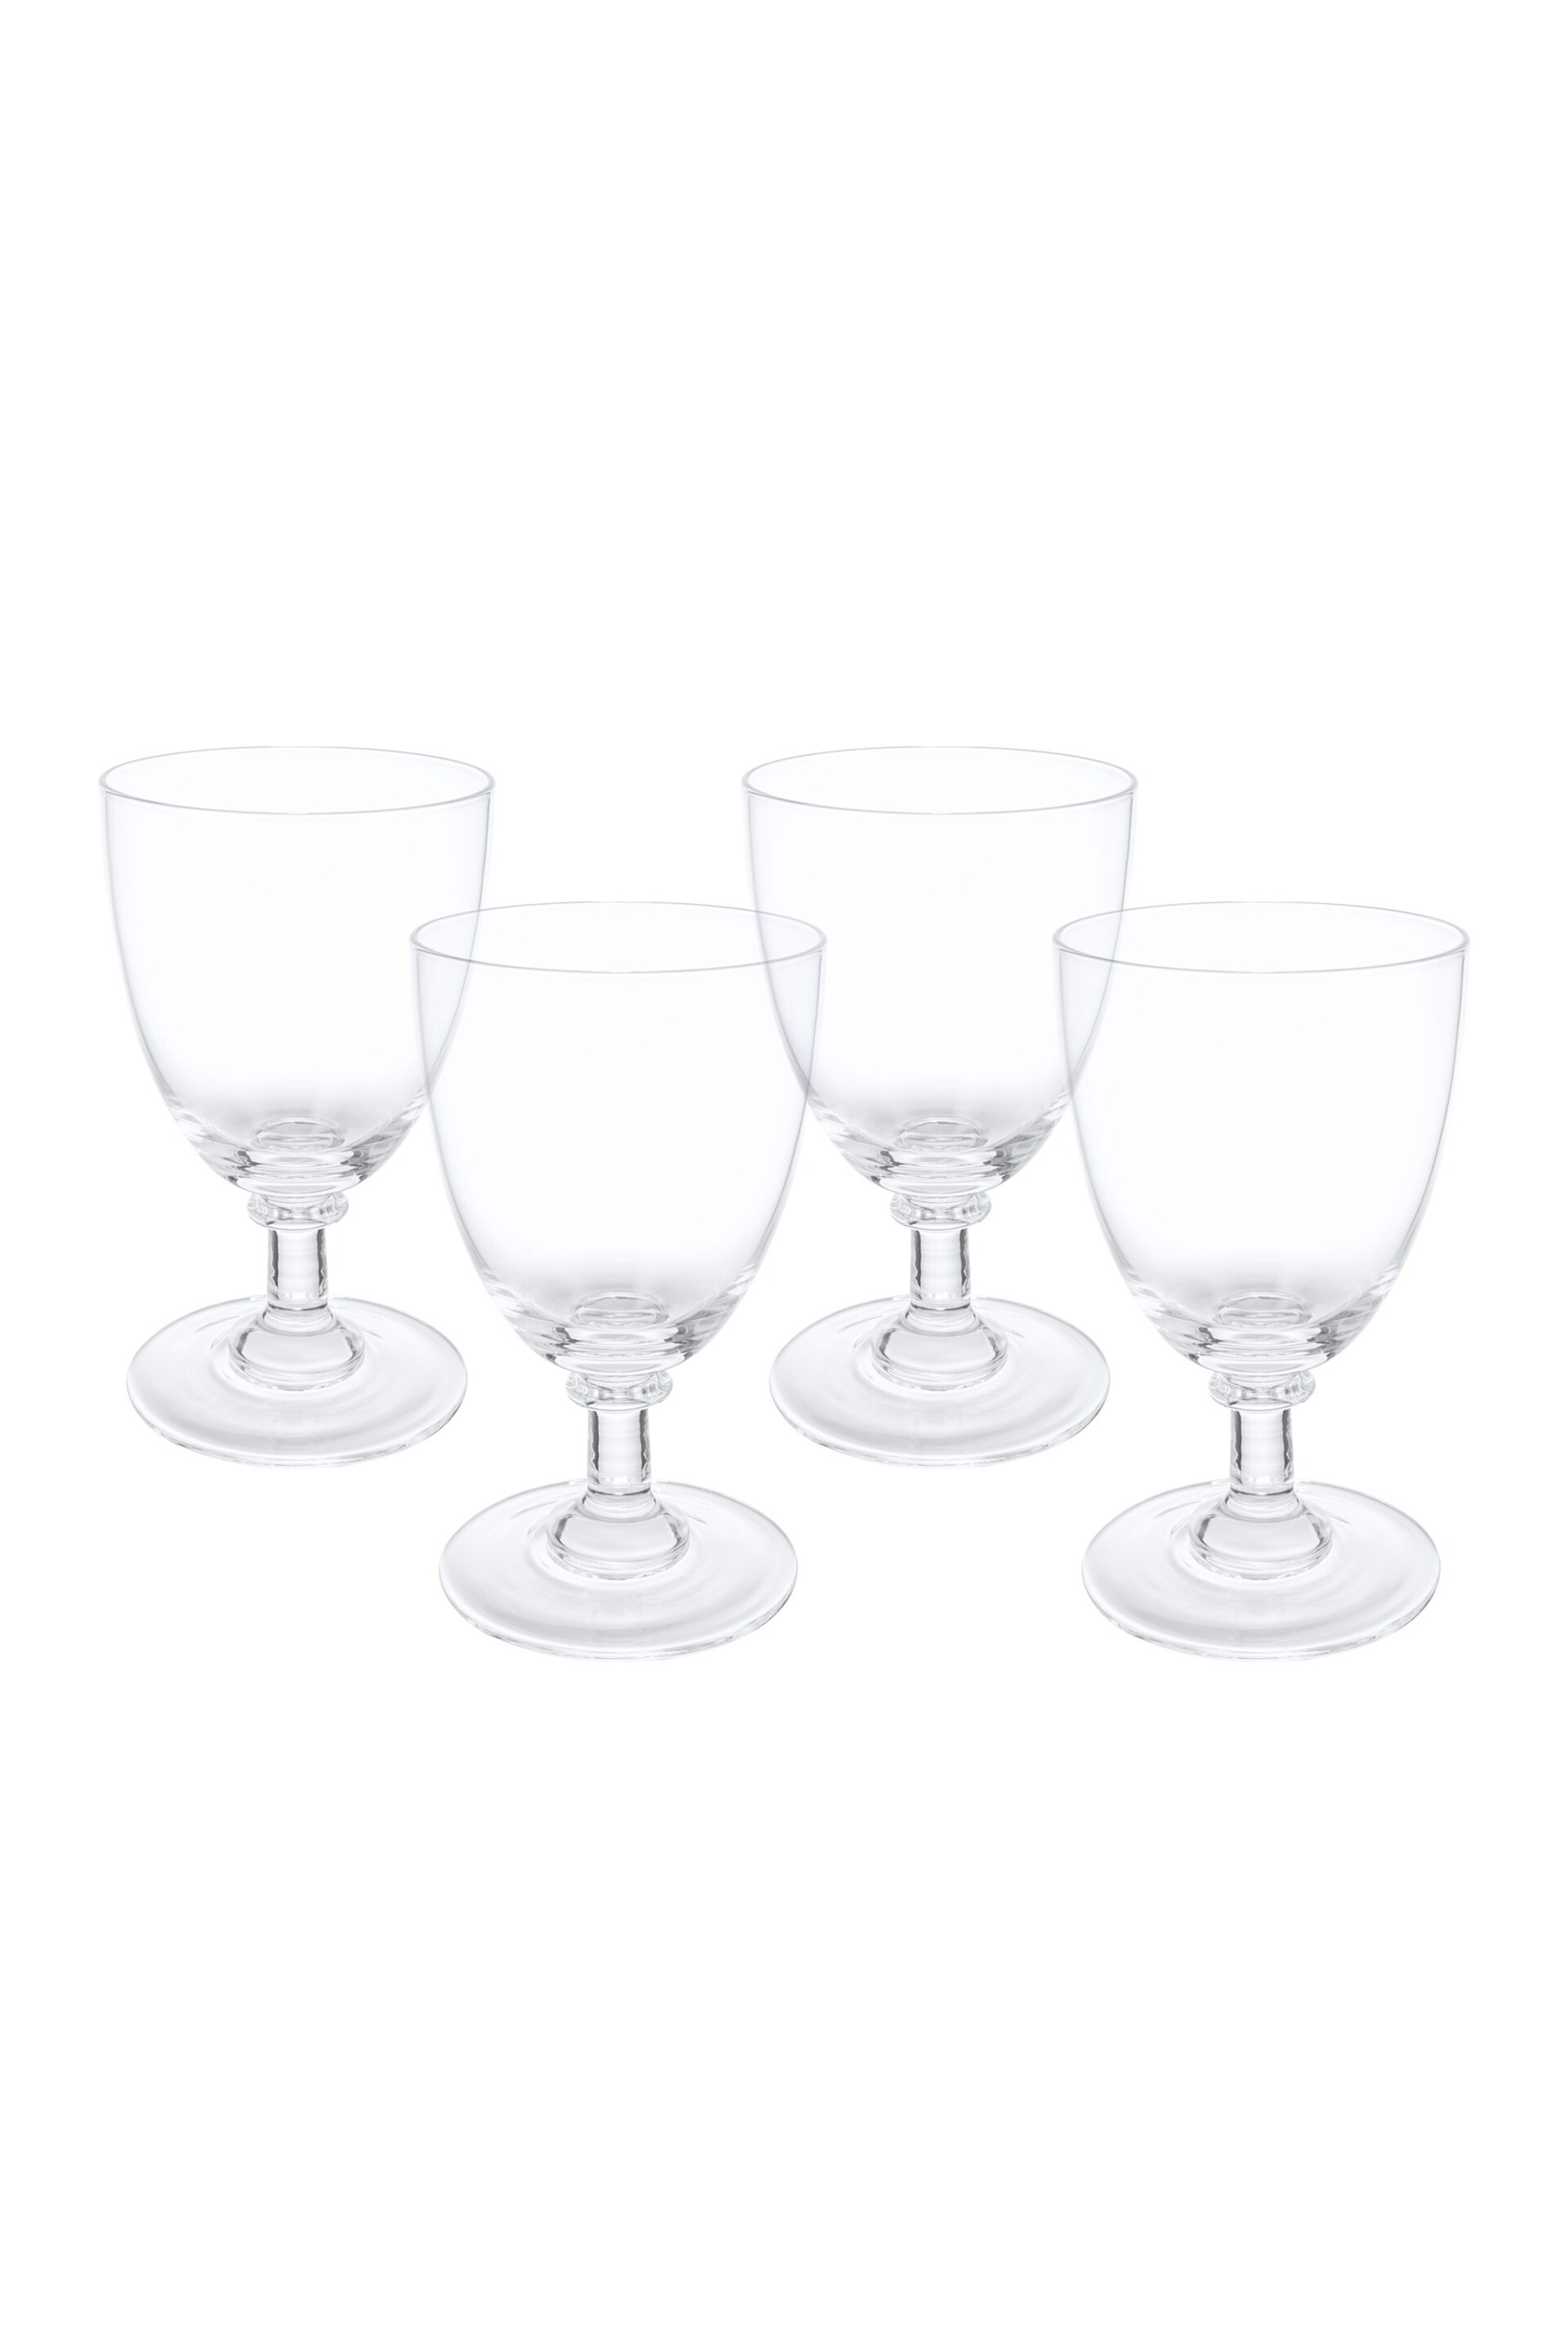 Mary Berry Set of 4 Clear Signature White Wine Glasses - Image 2 of 4